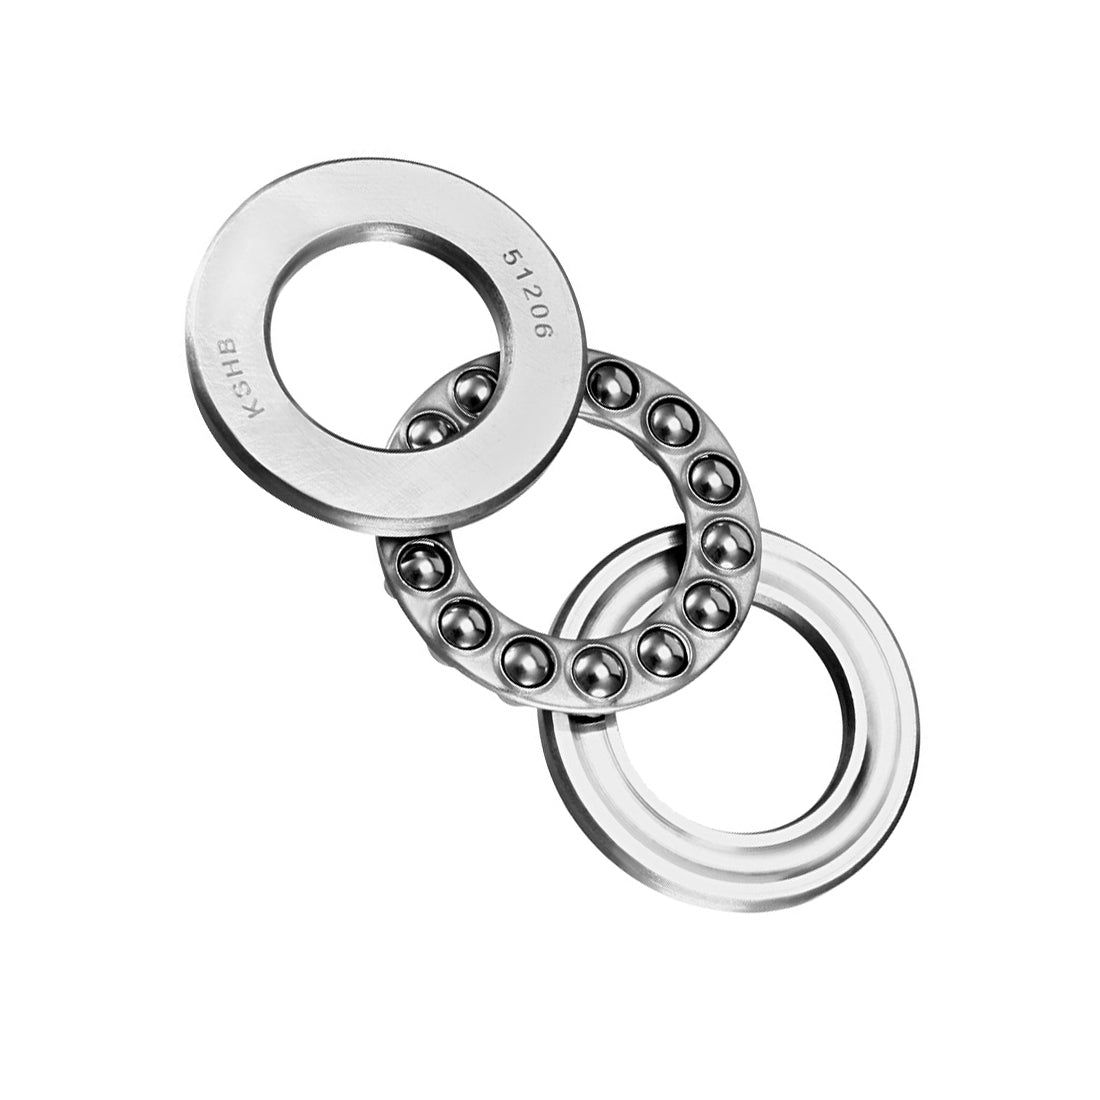 uxcell Uxcell 51206 Single Direction Thrust Ball Bearings 30mm x 52mm x 16mm Chrome Steel